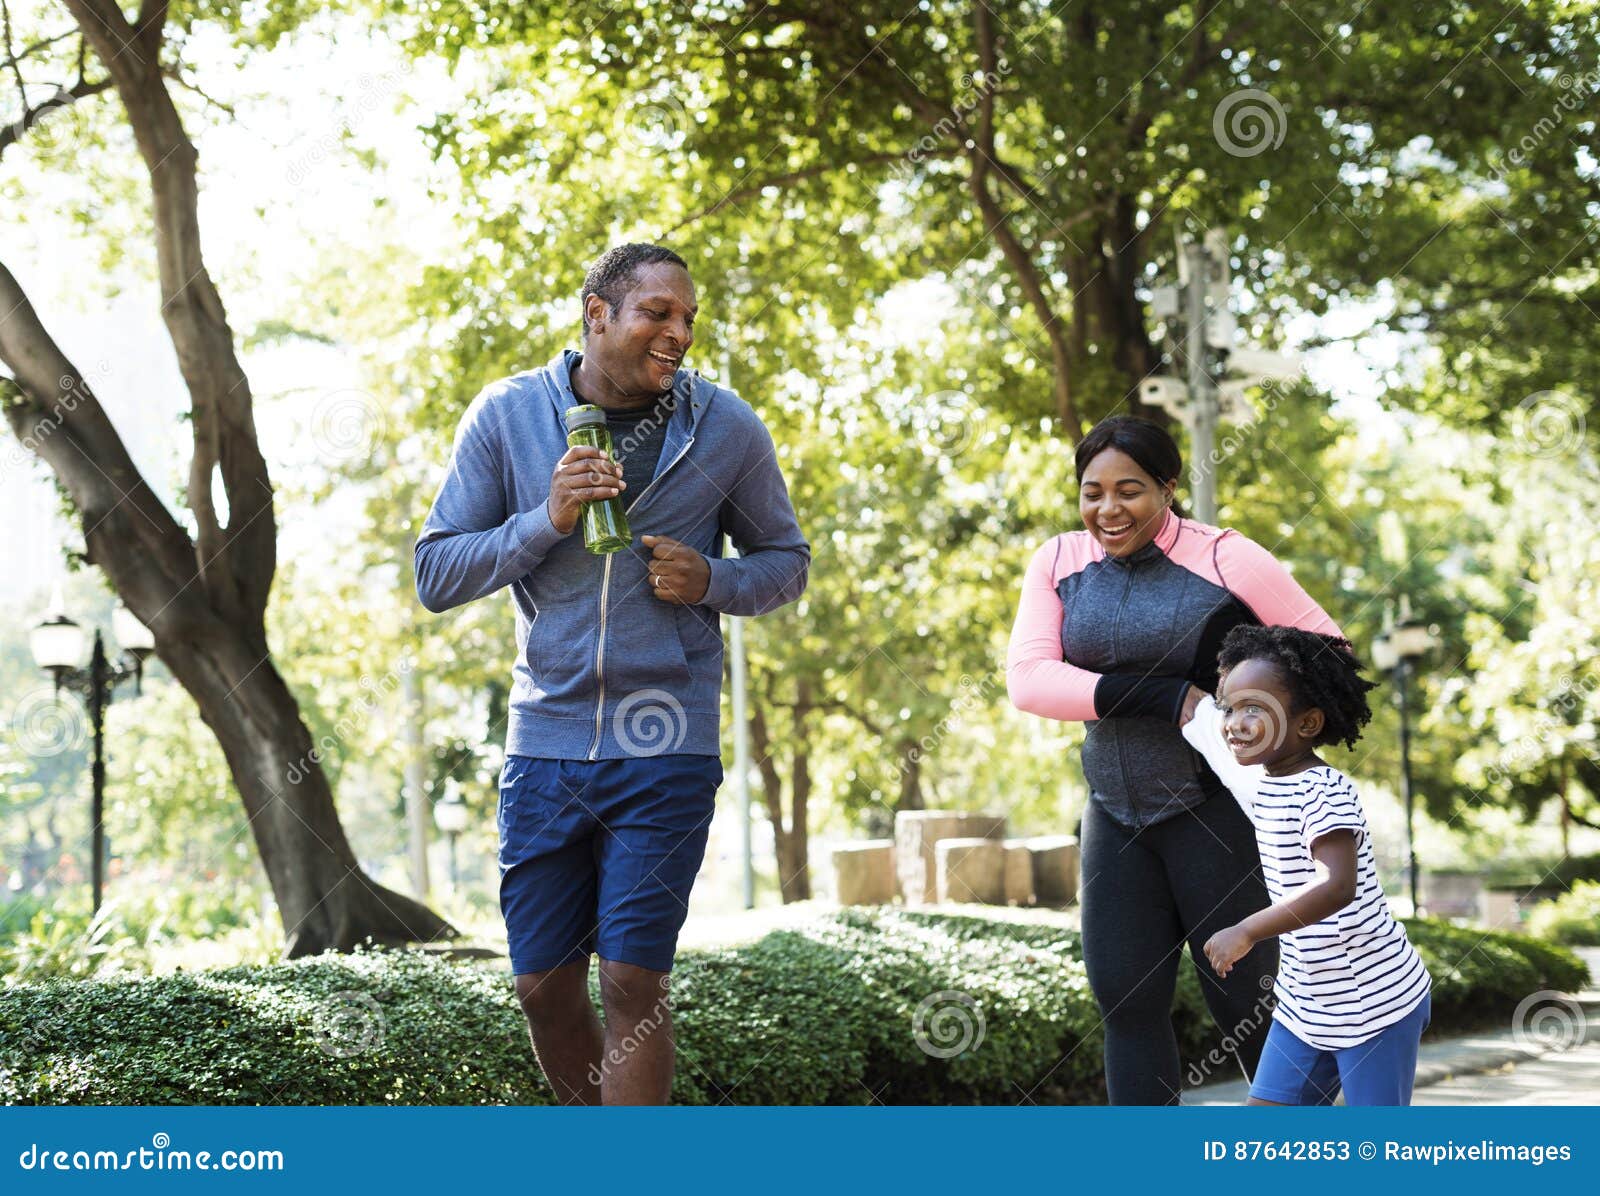 exercise activity family outdoors vitality healthy